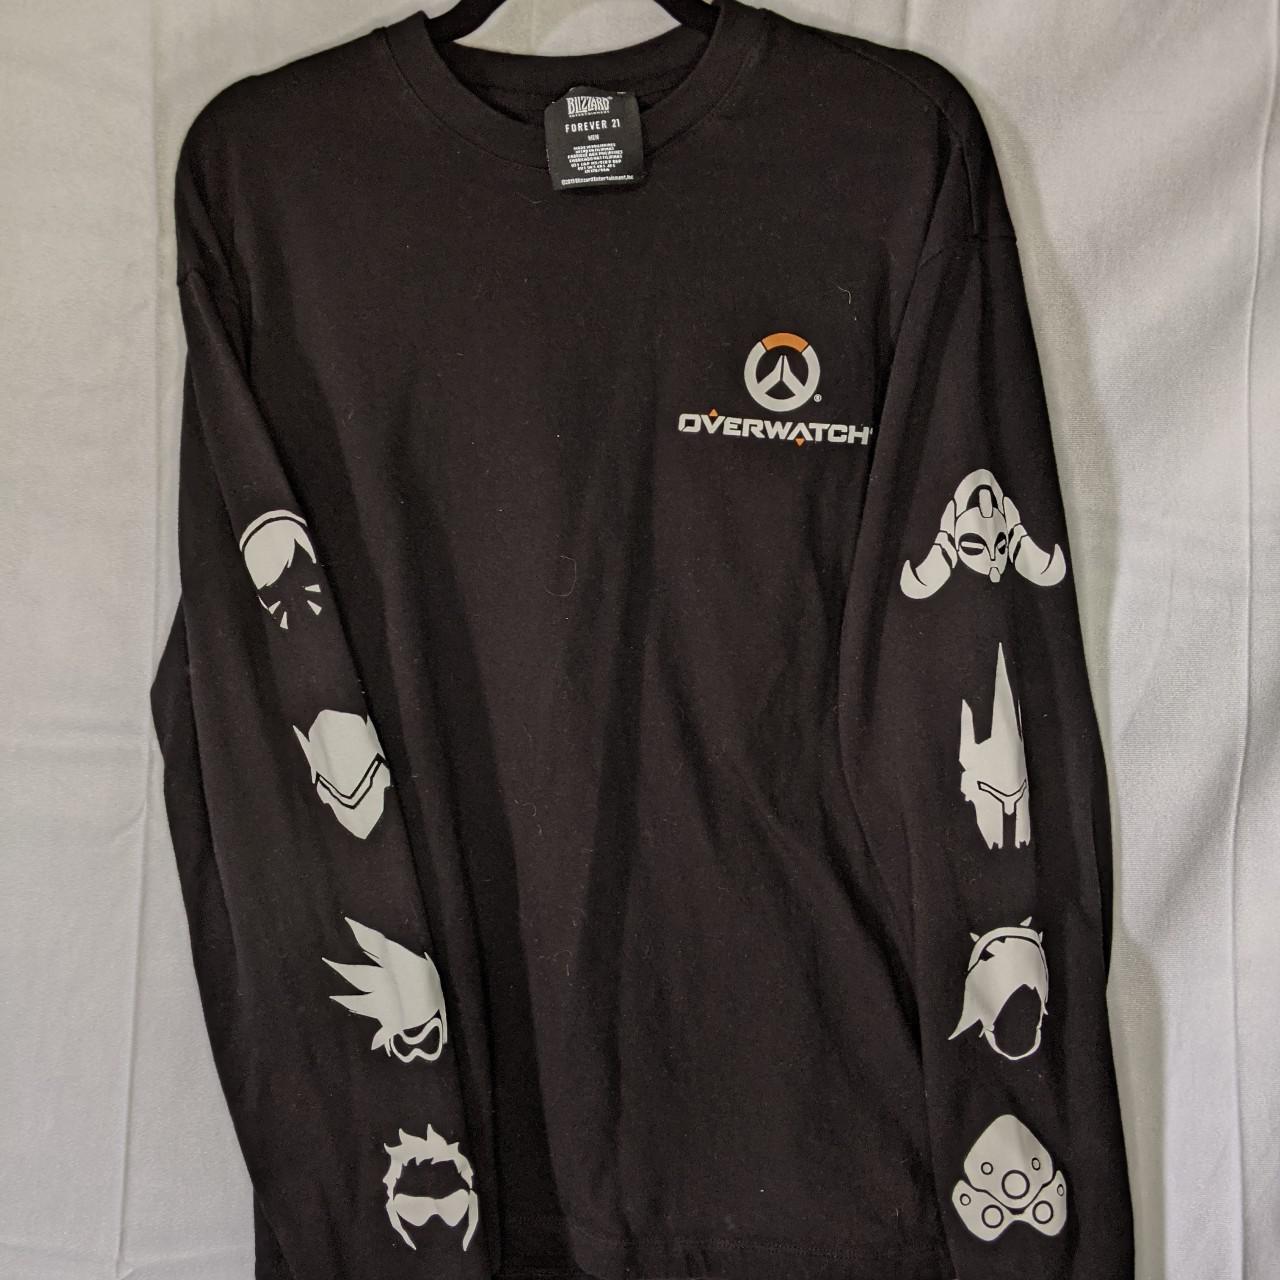 Product Image 1 - OVERWATCH LONG SLEEVE SMALL

#OVERWATCH #BLIZZARD